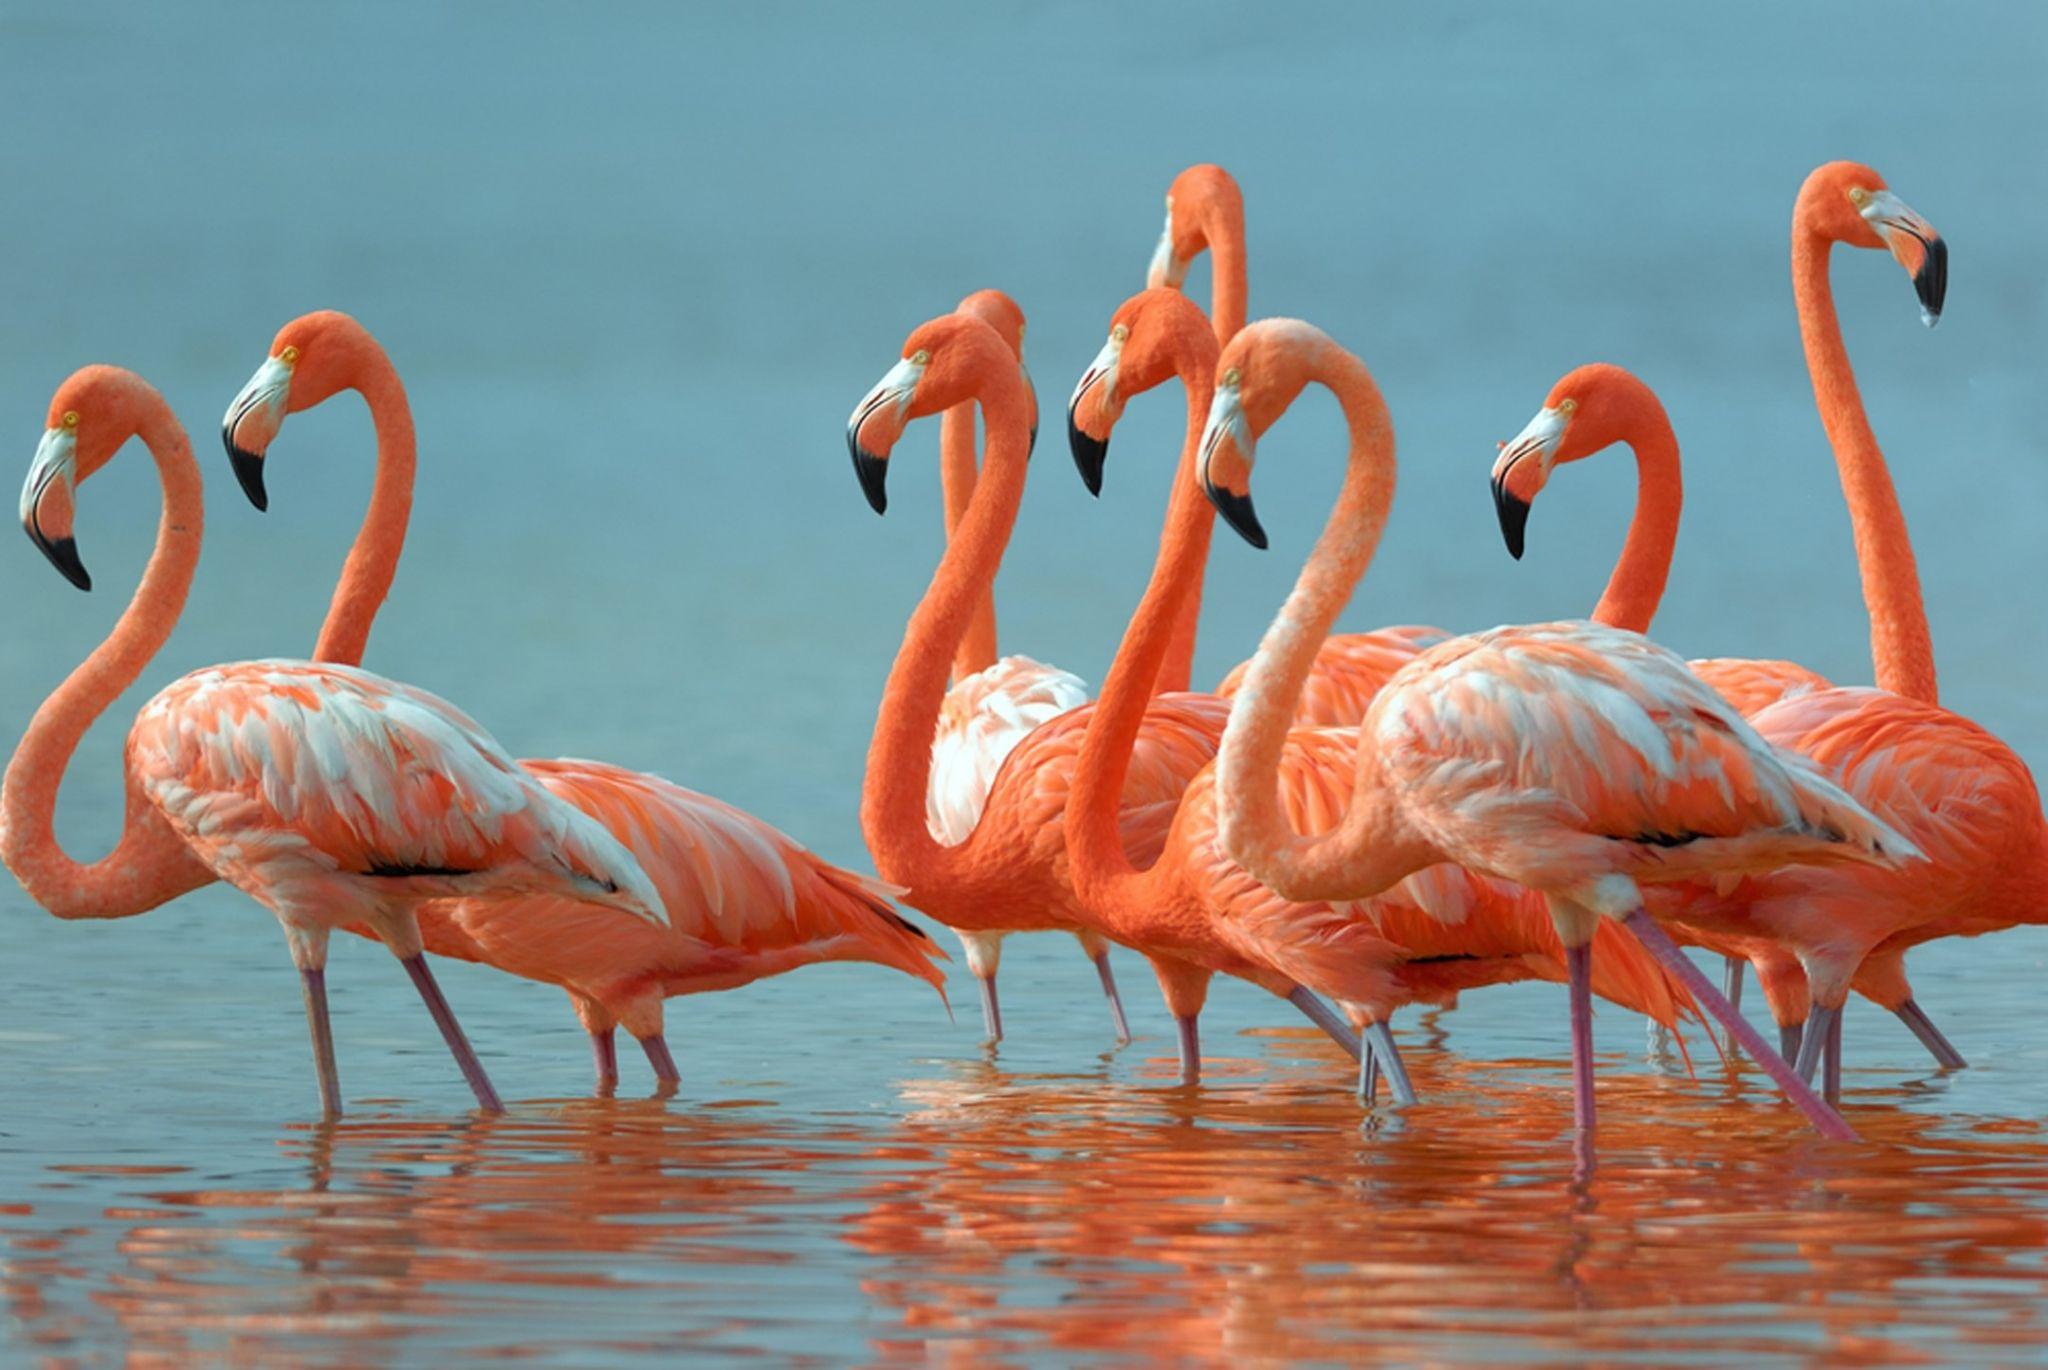 Flamingo Wallpaper Images  Free Photos PNG Stickers Wallpapers   Backgrounds  rawpixel